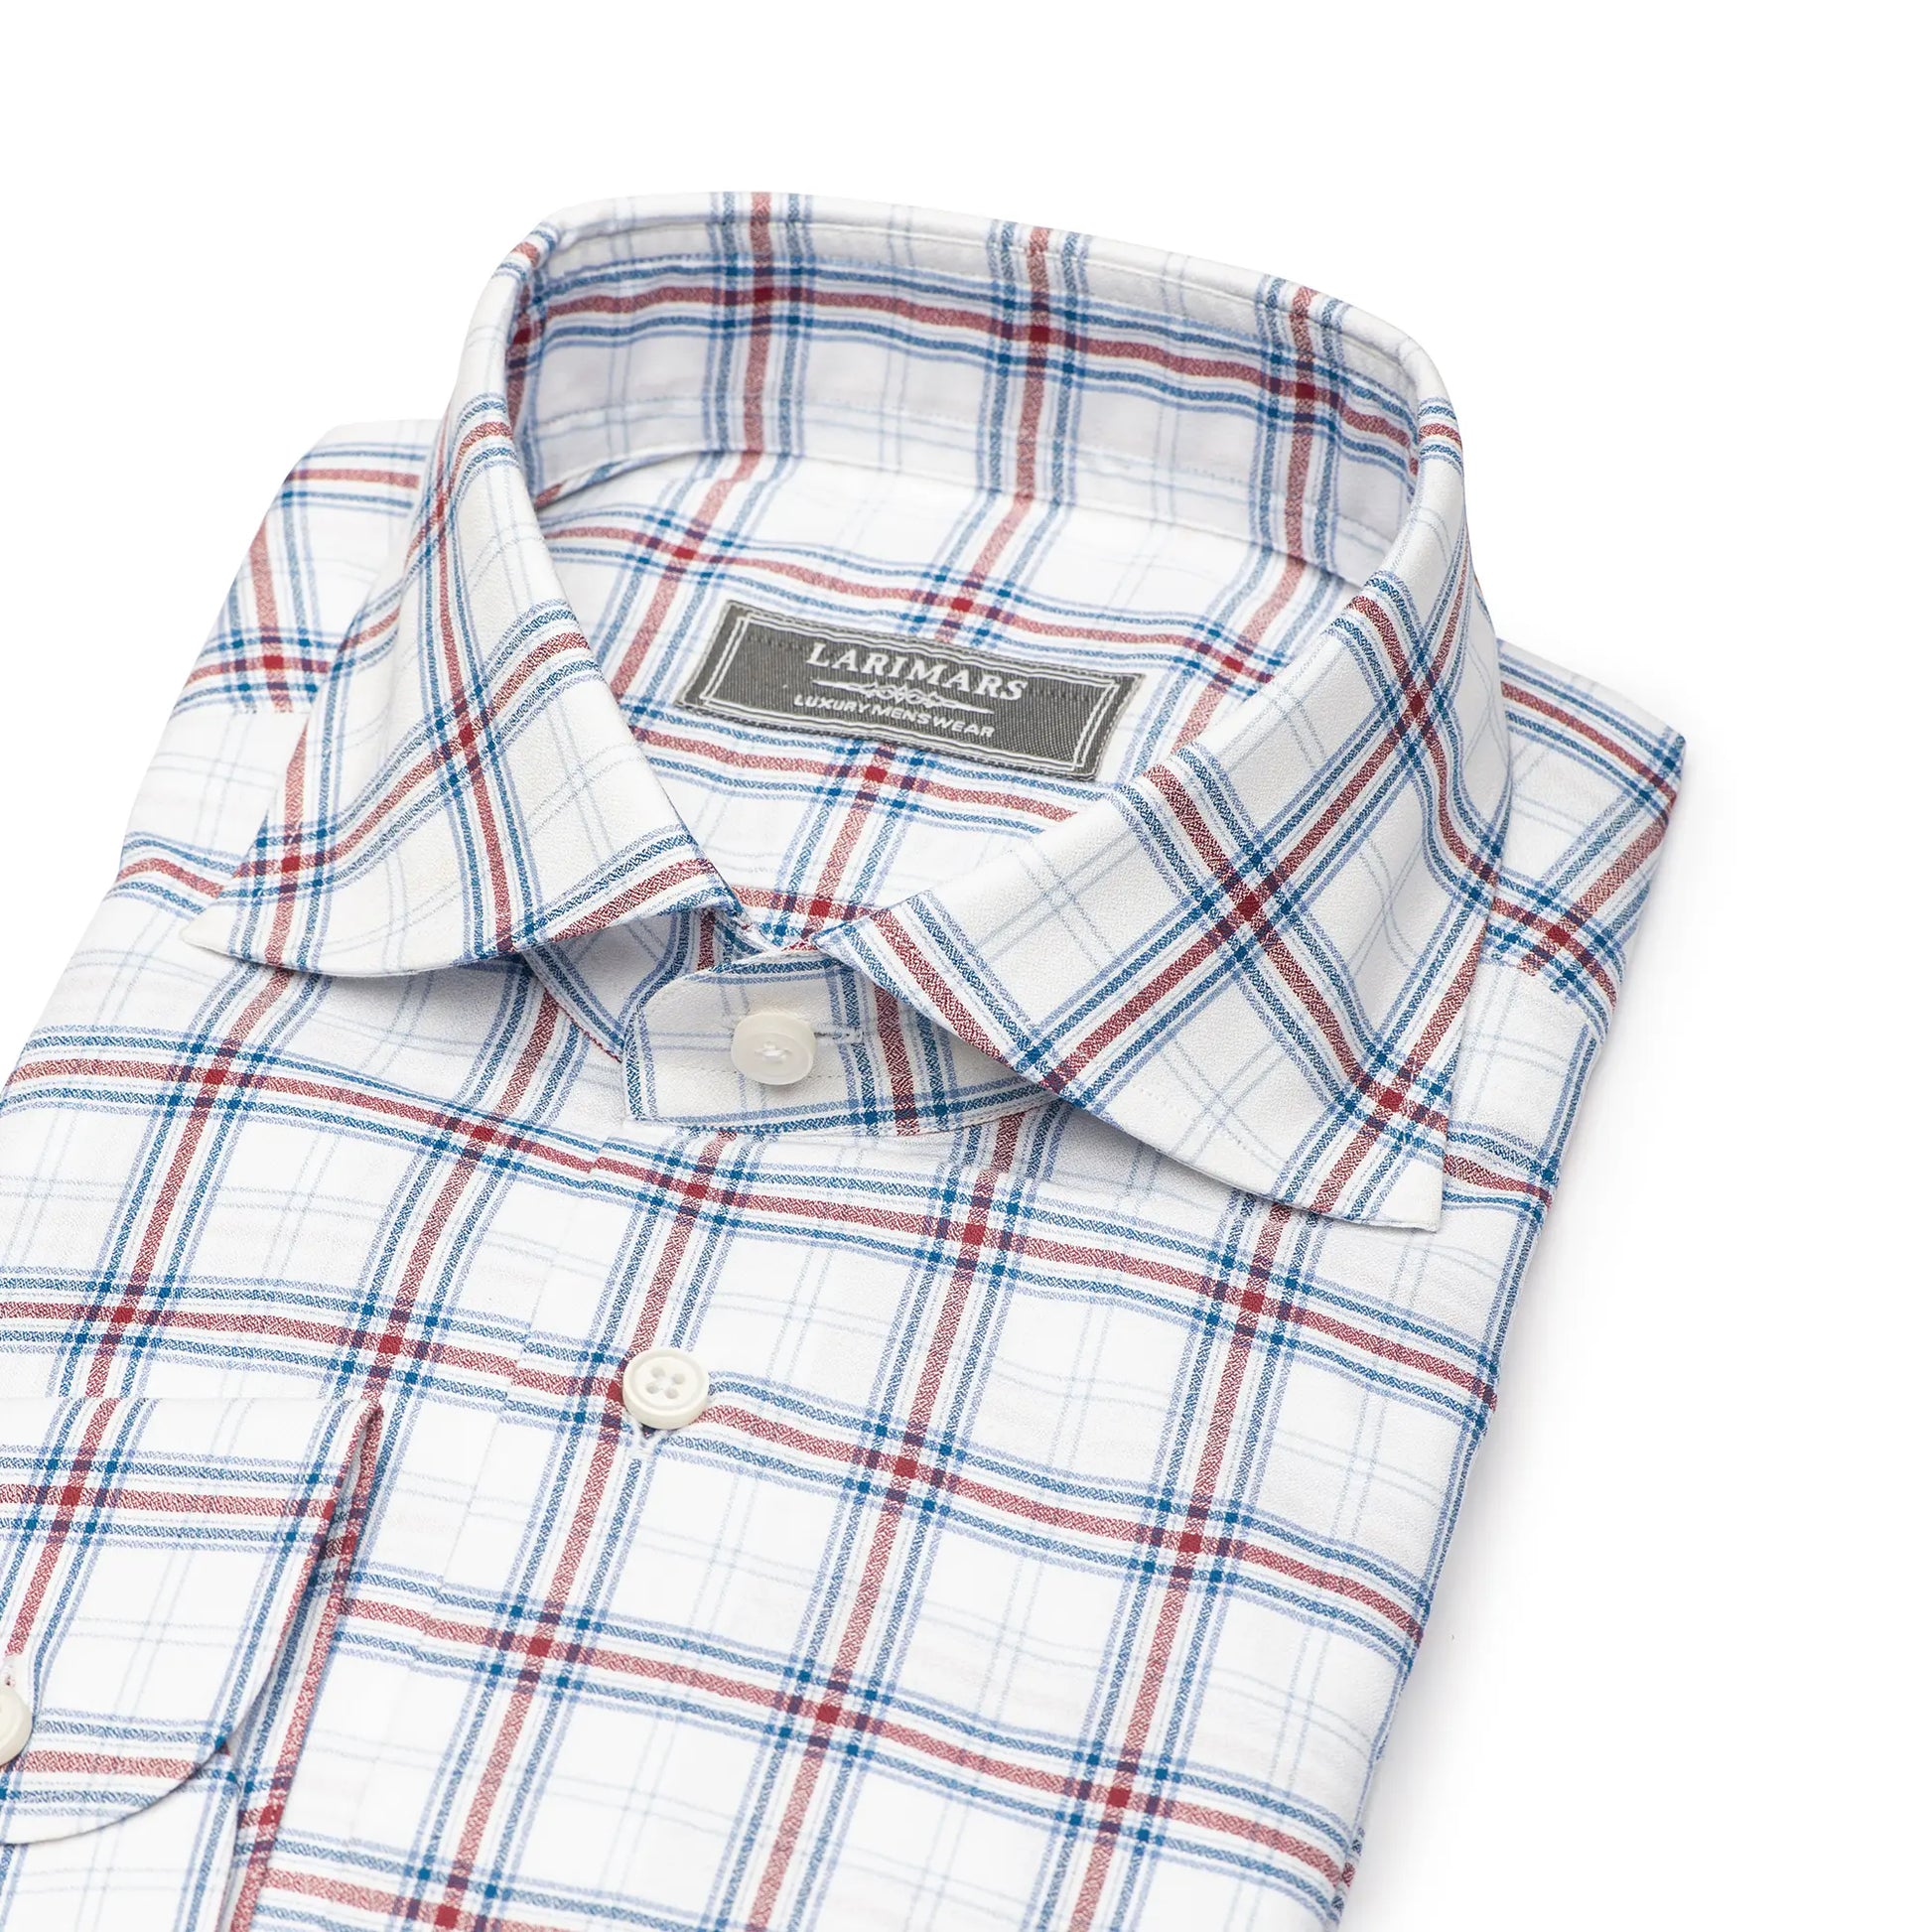 Blue & Red Big Check - Larimars Clothing Men's Formal and casual wear shirts